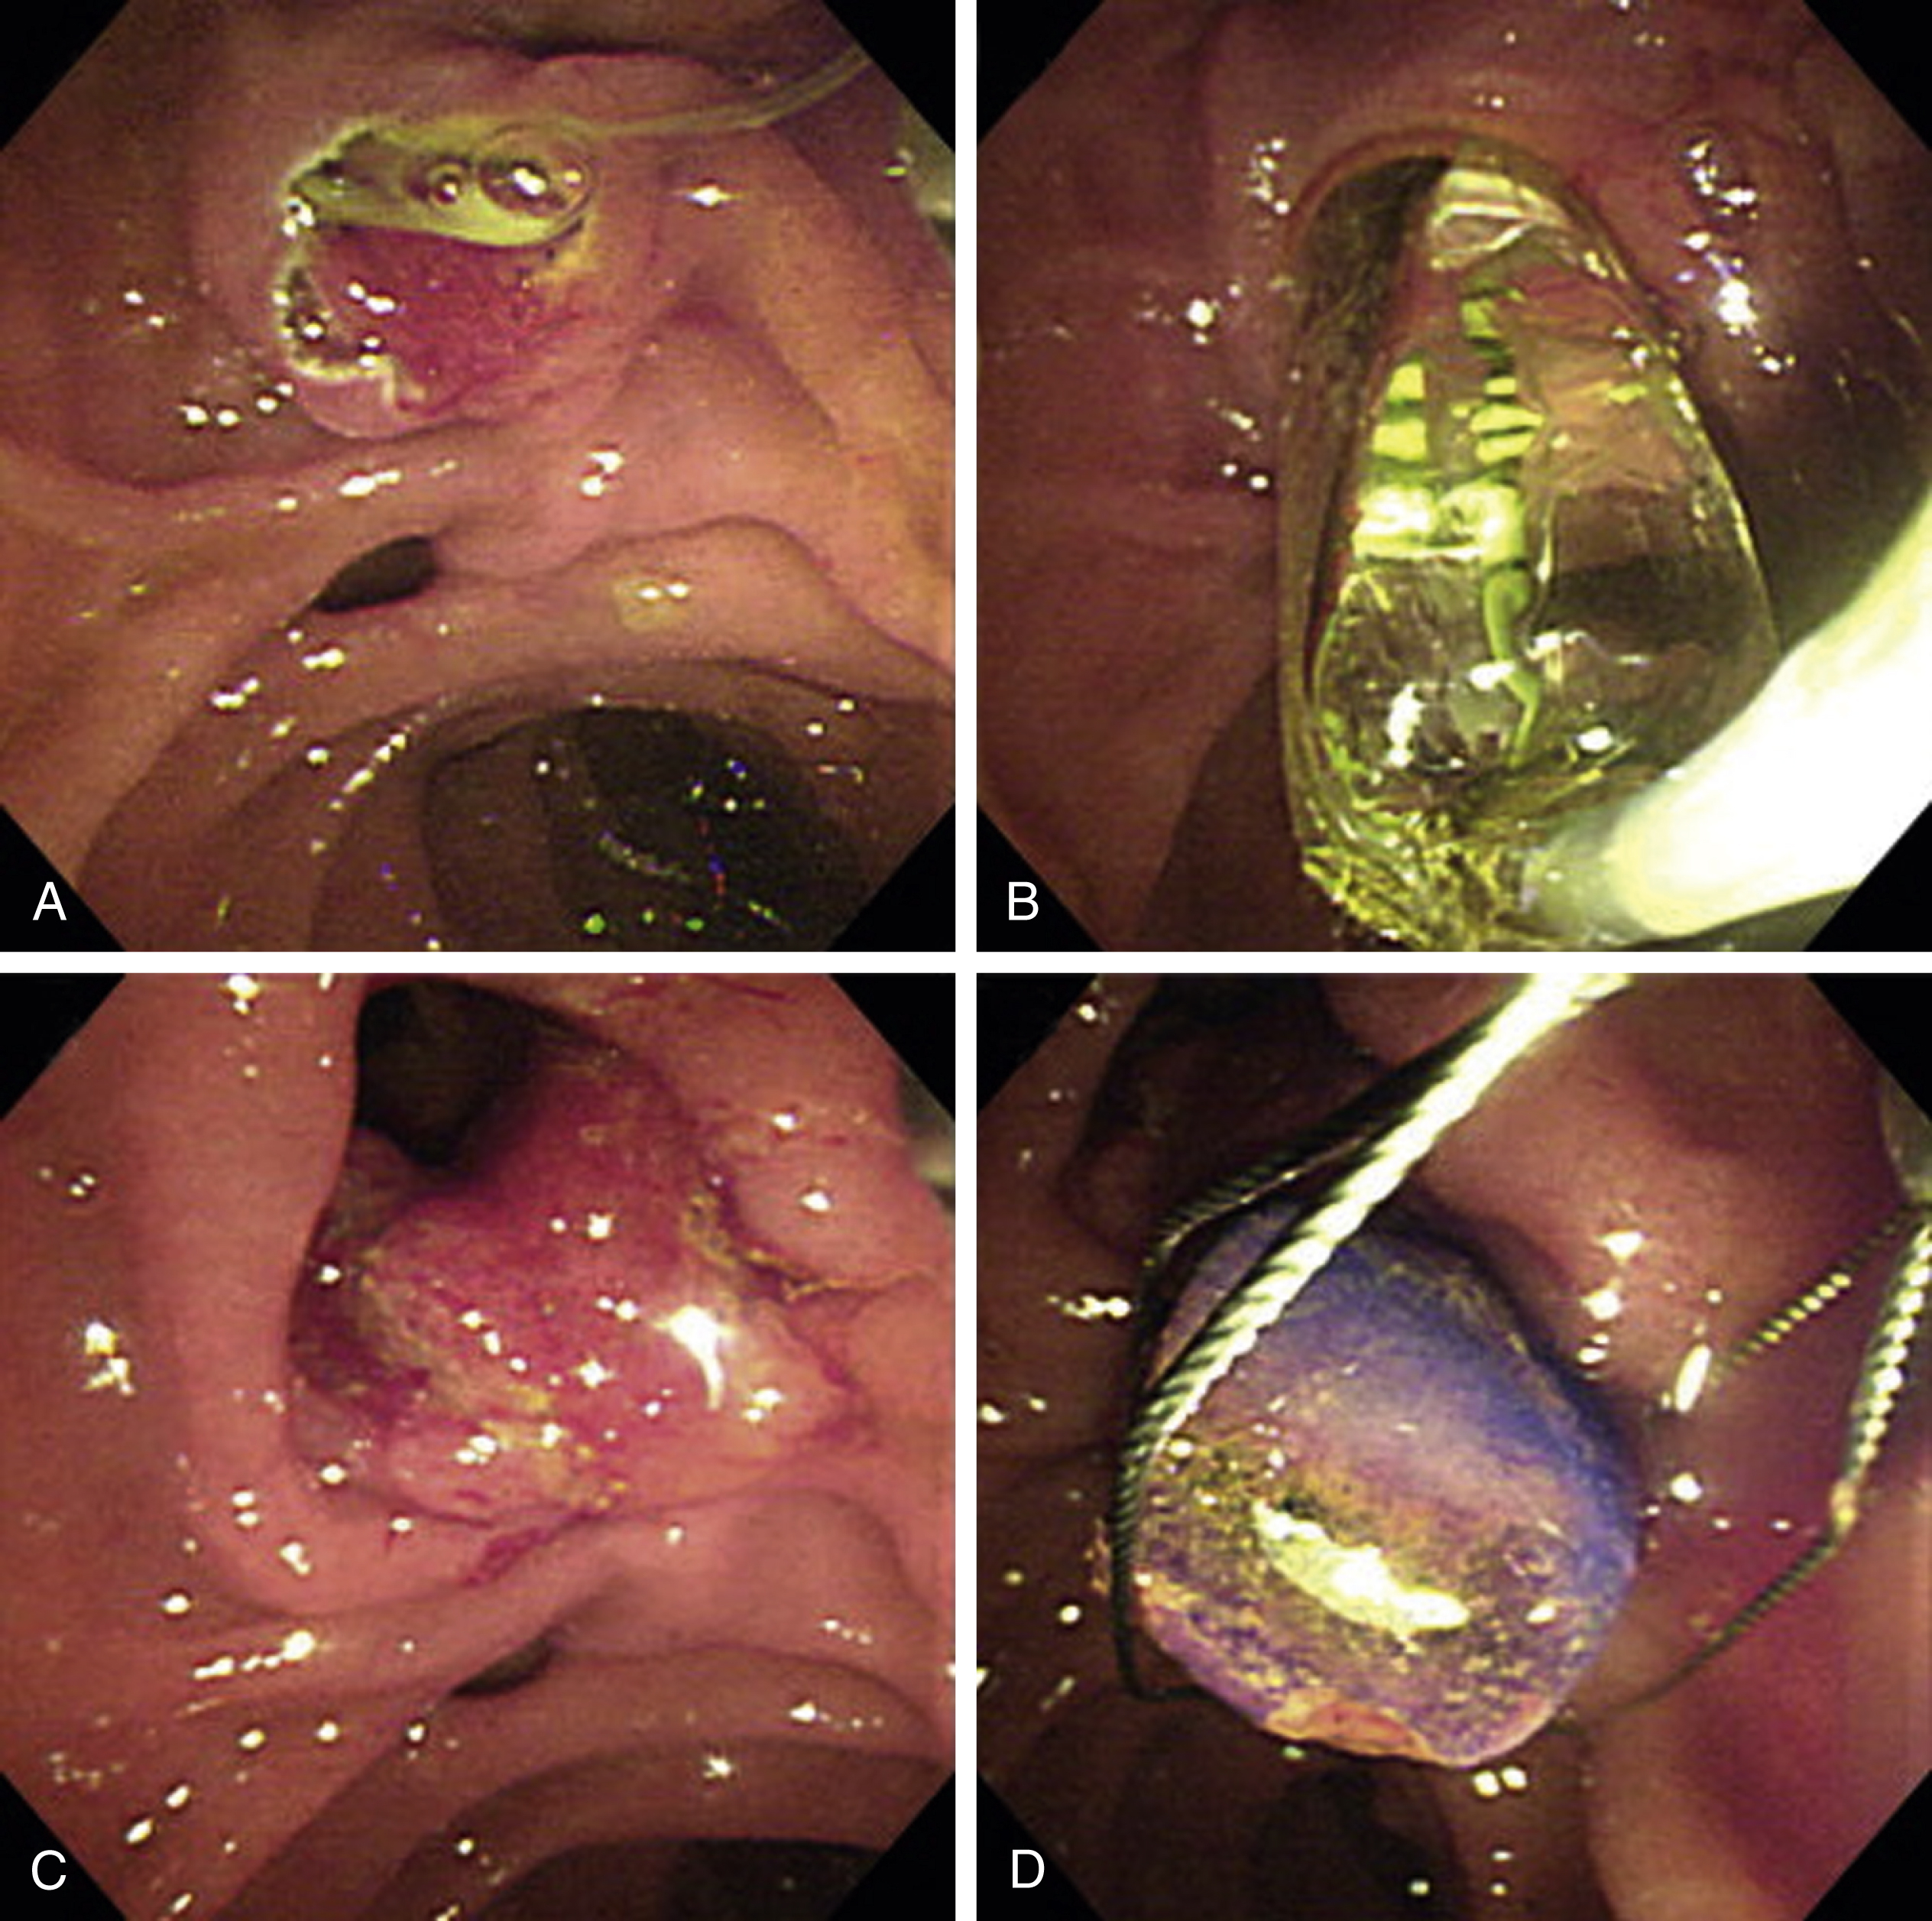 Fig. 96.1, Supplemental endoscopic papillary large balloon dilation. (A) Partial biliary sphincterotomy. (B) Papillary orifice is dilated with 12-mm-diameter balloon. (C) Large orifice is noted after the dilation. (D) The 12-mm stone is easily removed through the orifice.